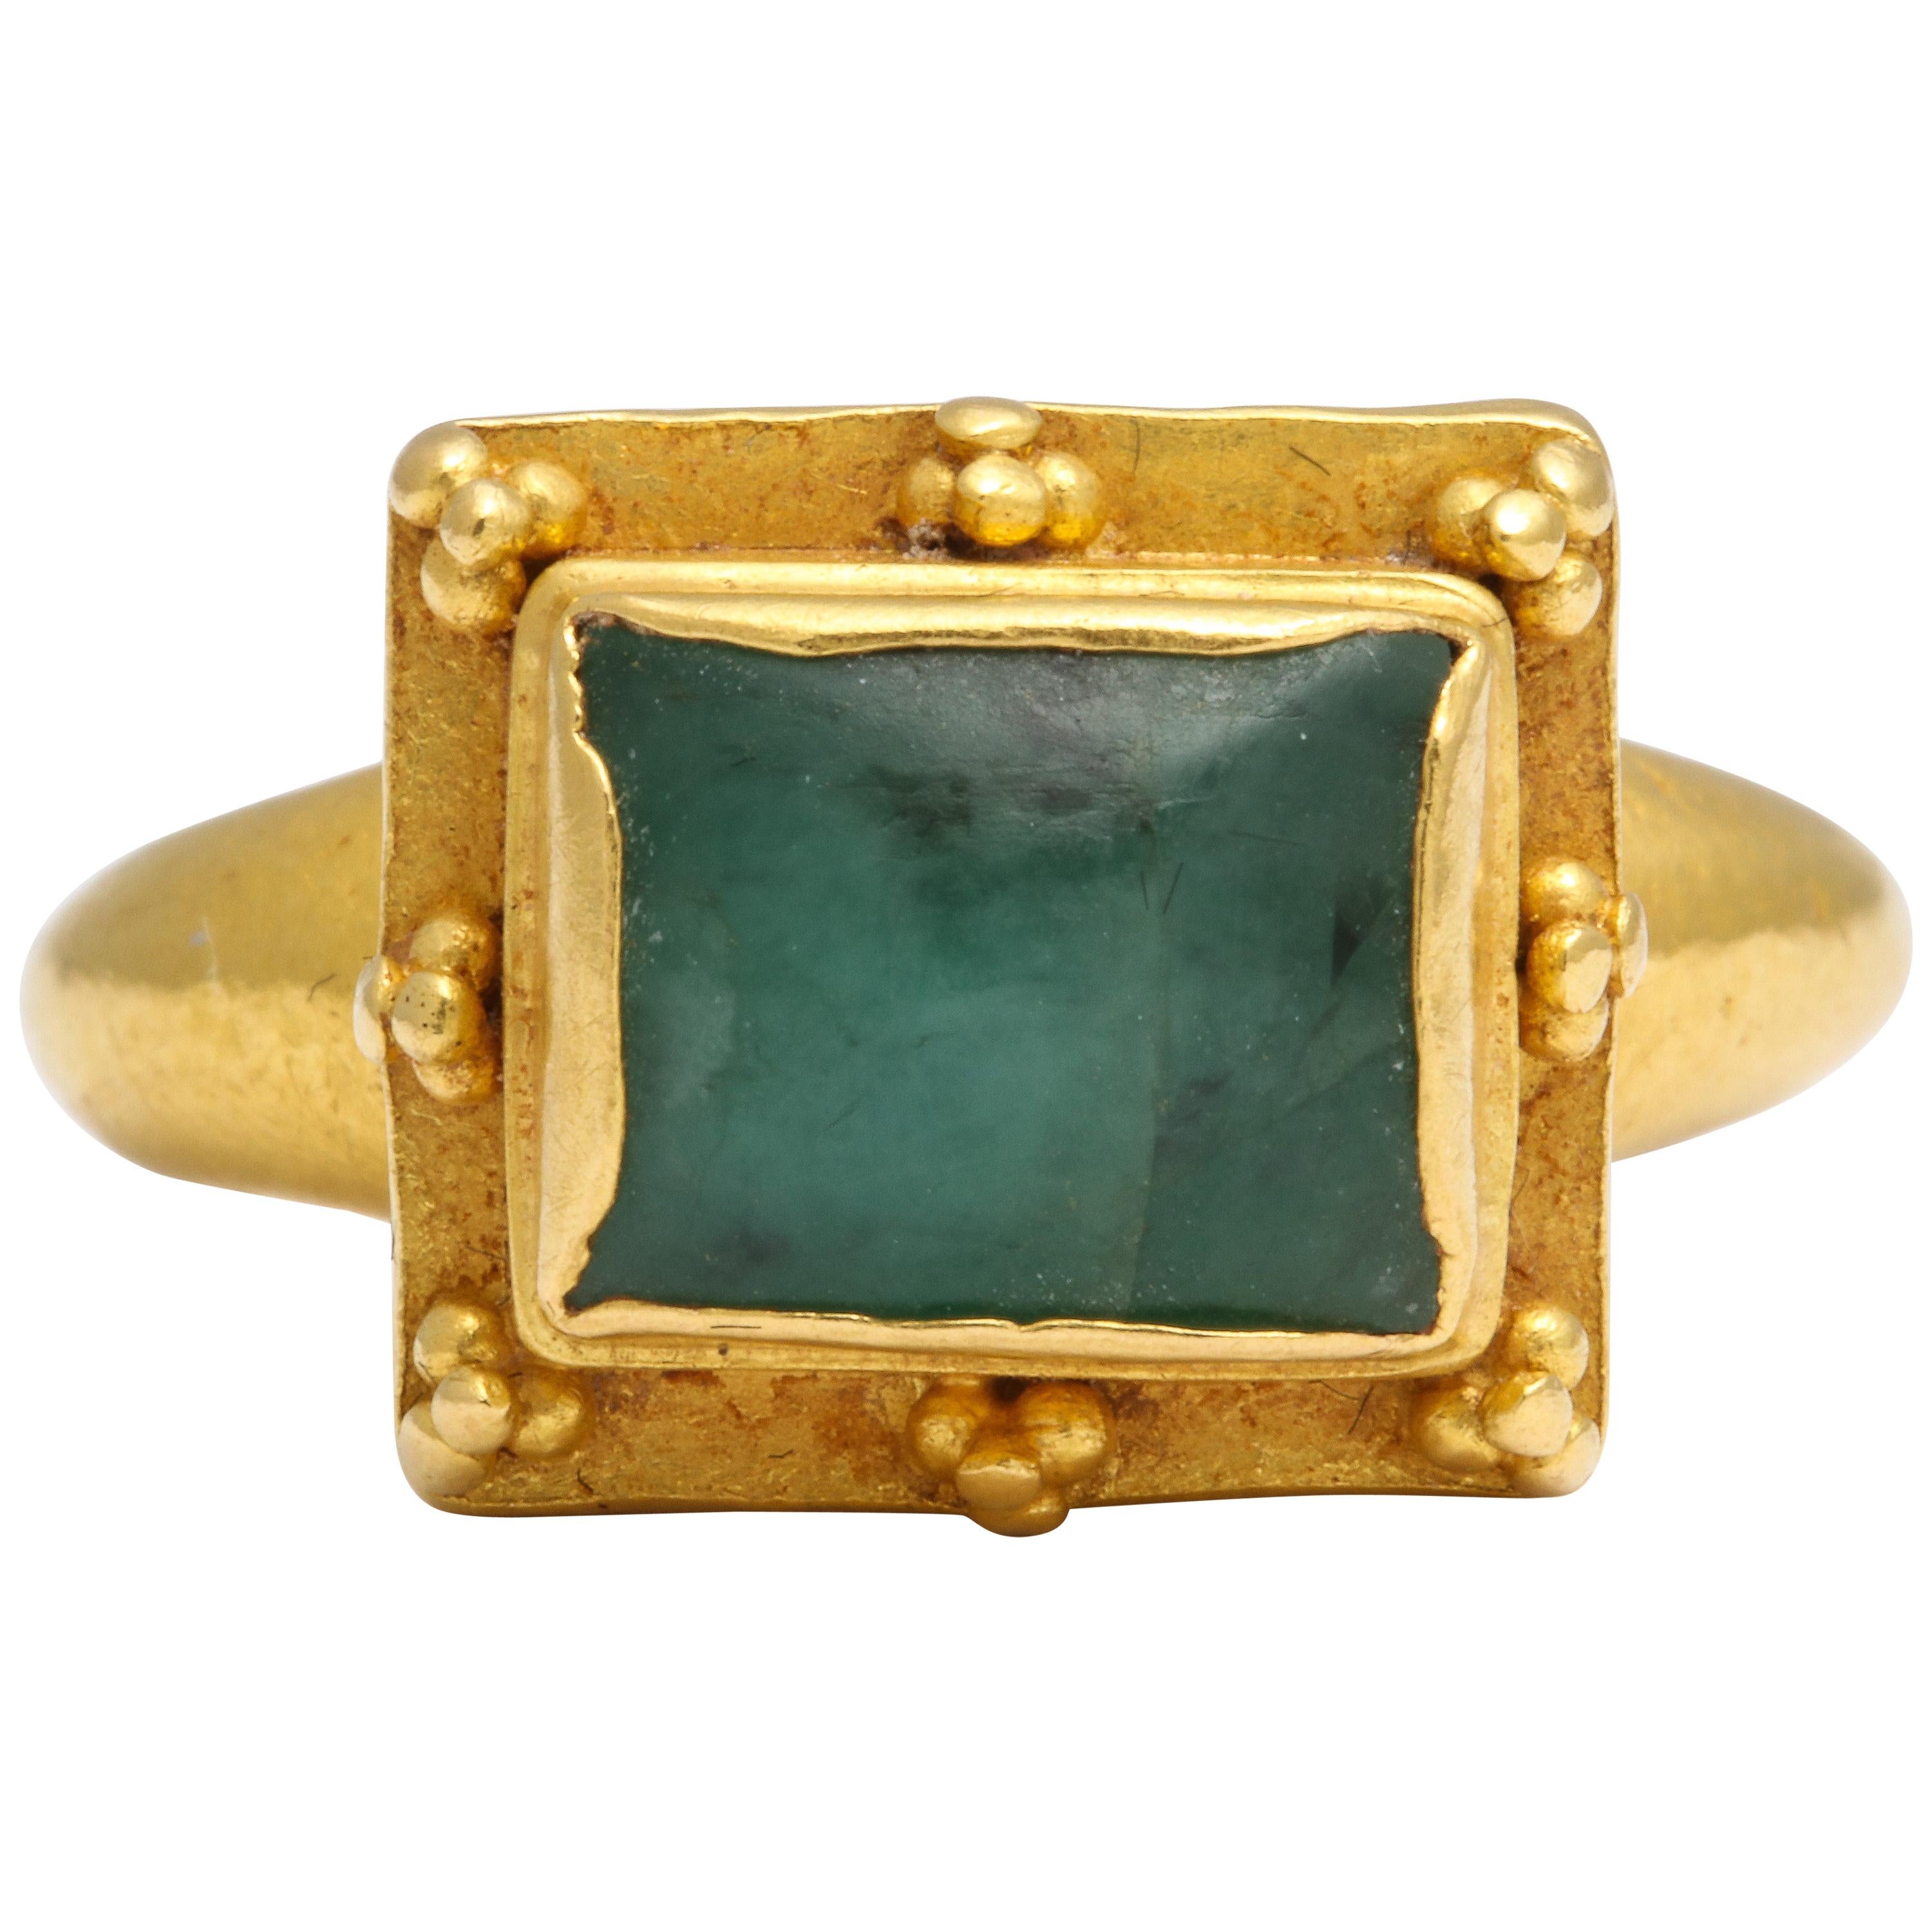 Ancient Medieval Gold Emerald Ring